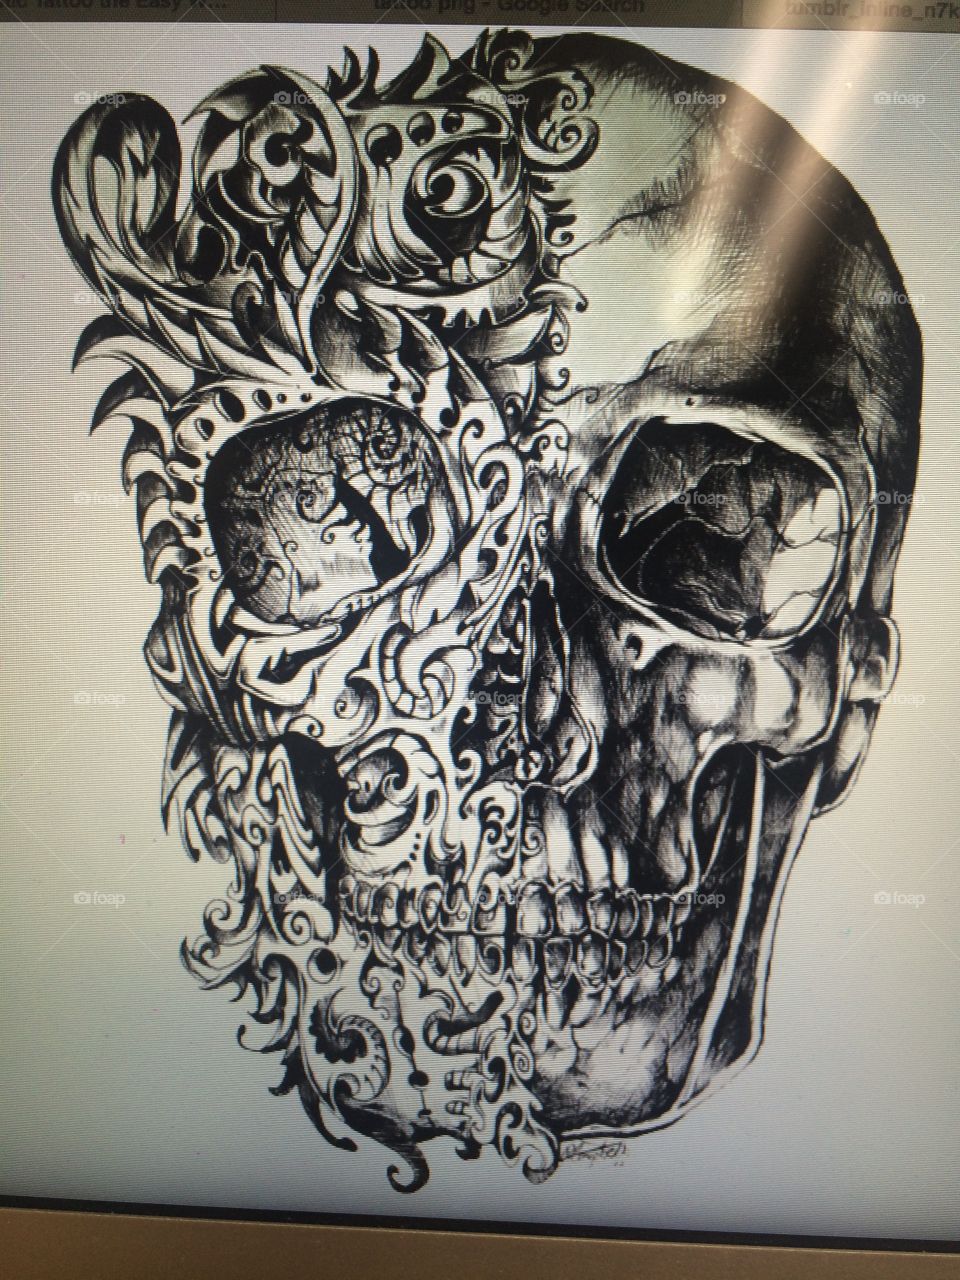 A flower skull tattoo that I really want to get! Haven't decided where yet